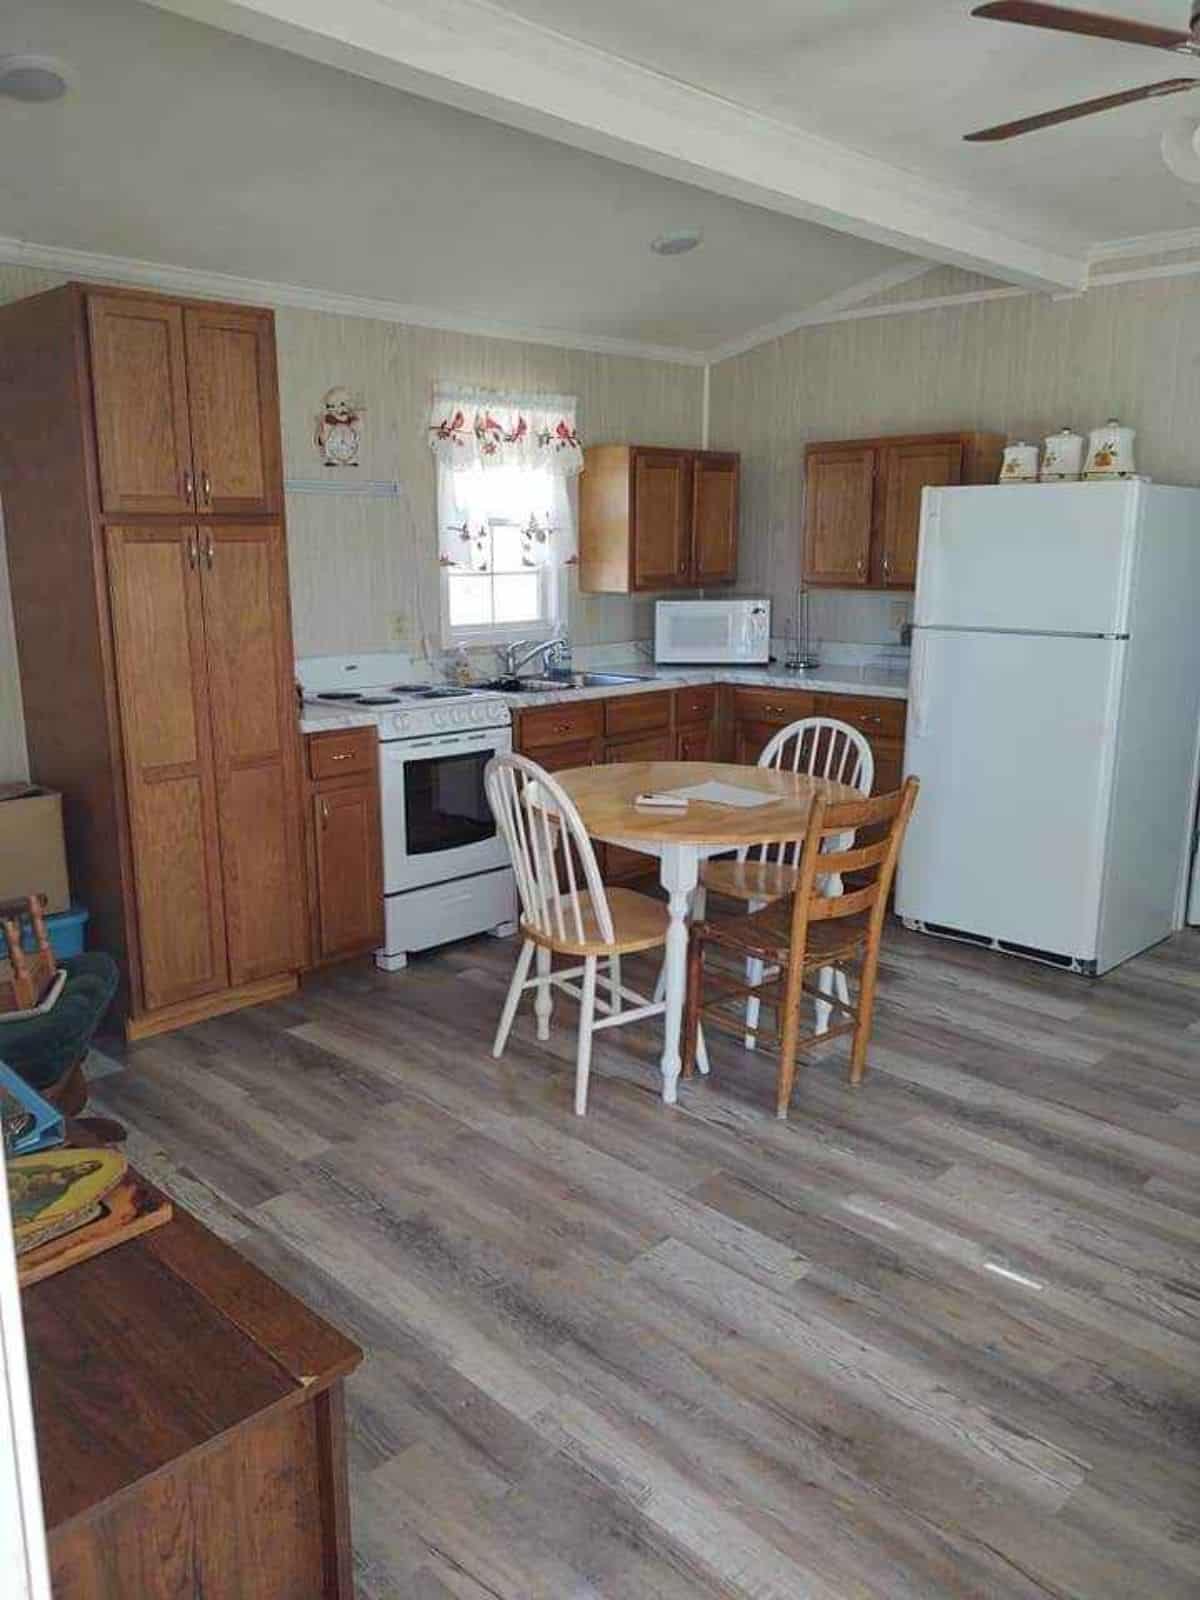 Classic L shaped kitchen table area, dinning area with chairs and spacious living area of 40’ Tiny House